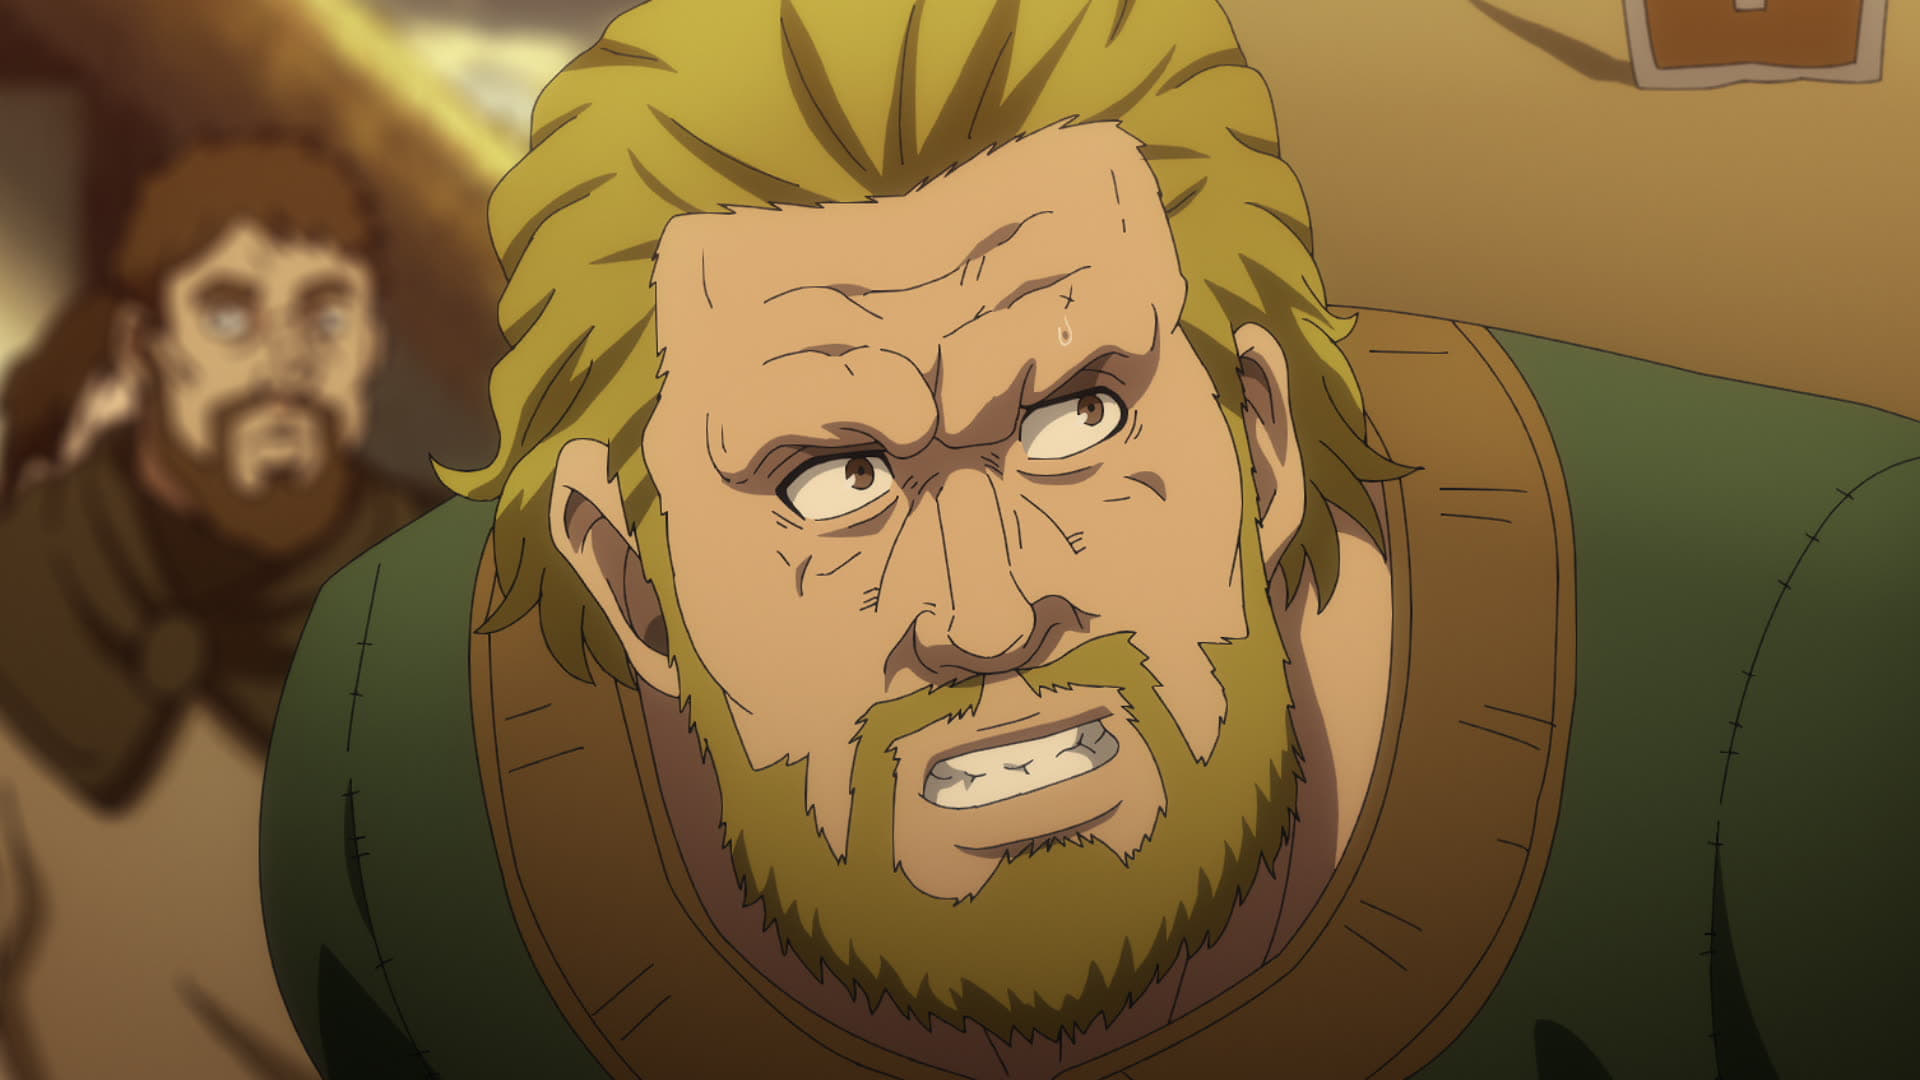 Vinland Saga Season 2 Voice Actors, Who Are the Japanese and